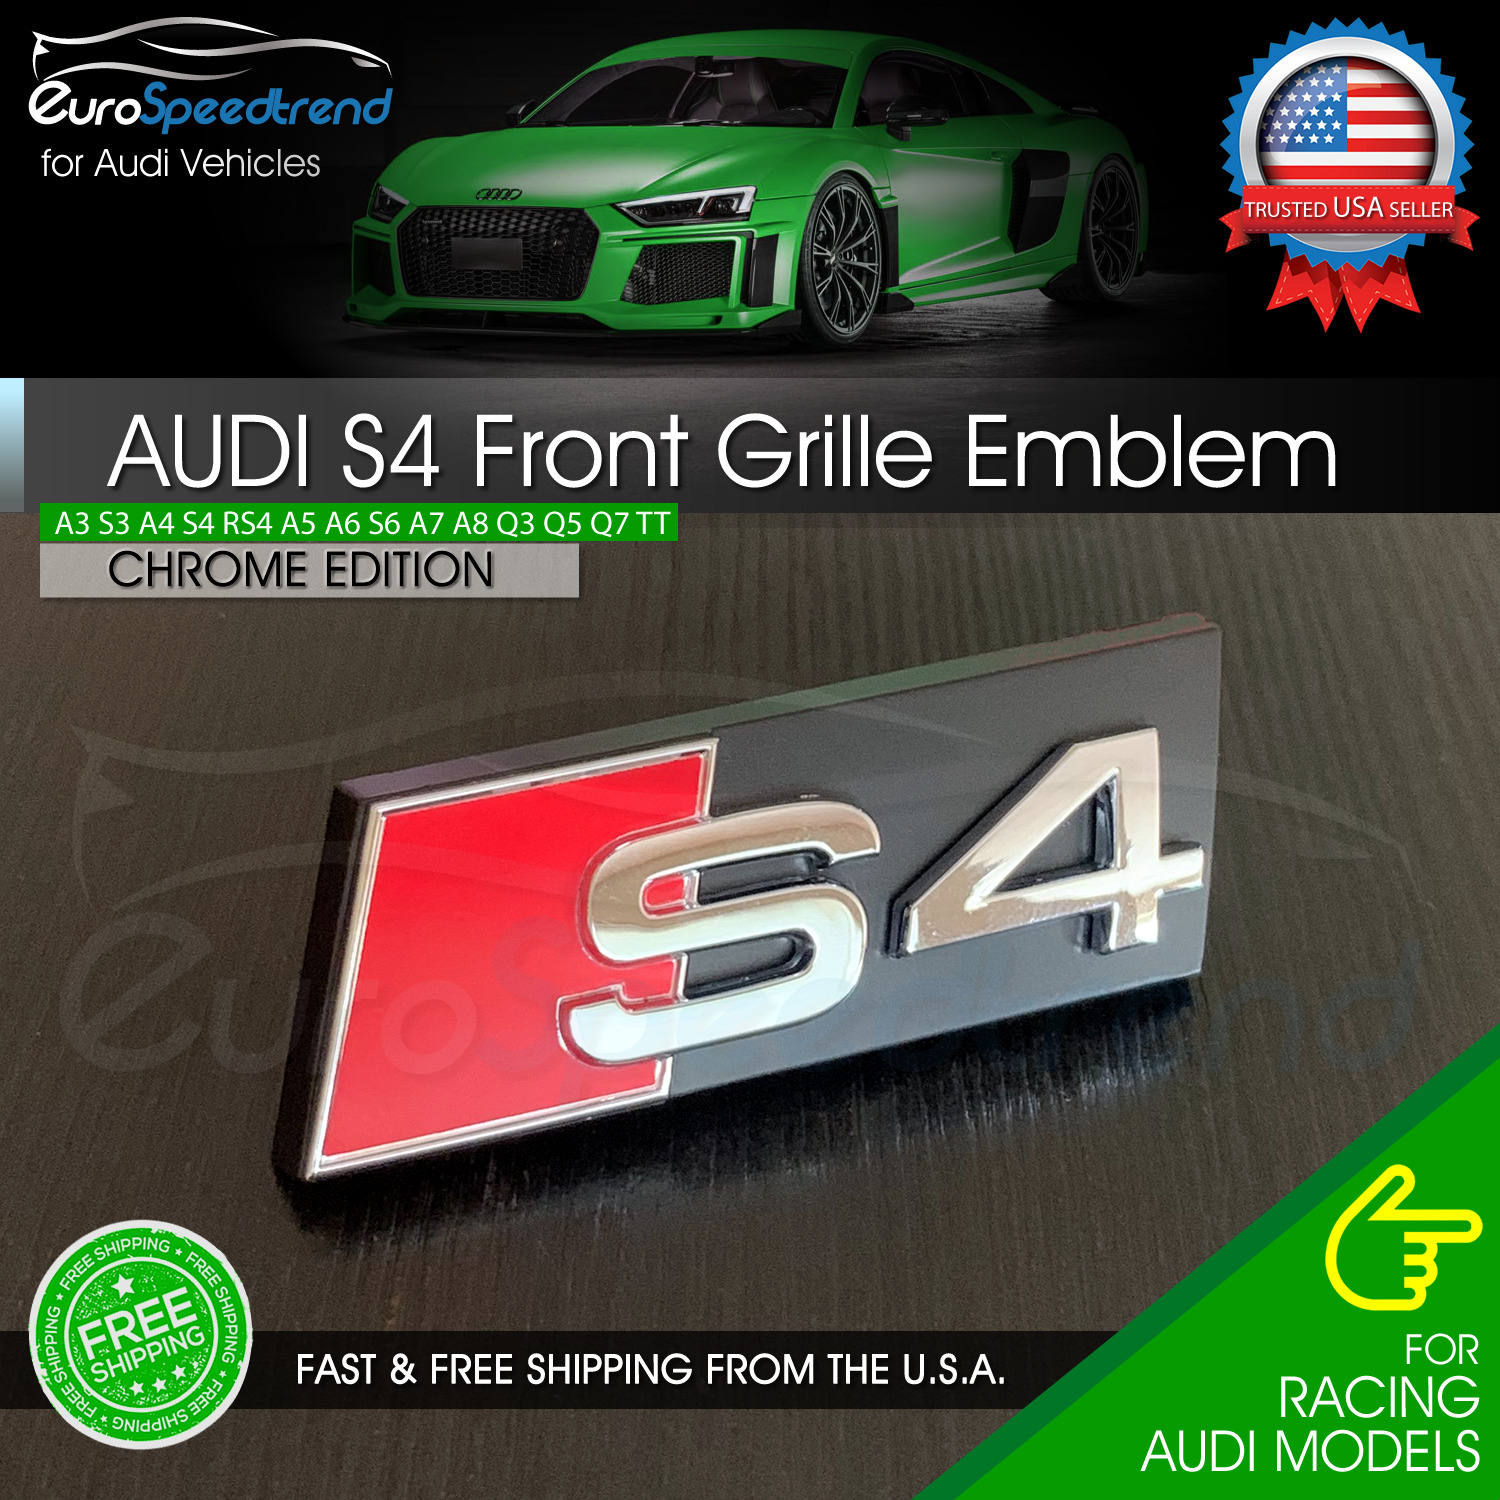 Audi S4 Front Grill Chrome Emblem fit A4 S4 B8 B9 Hood Grille Badge OE